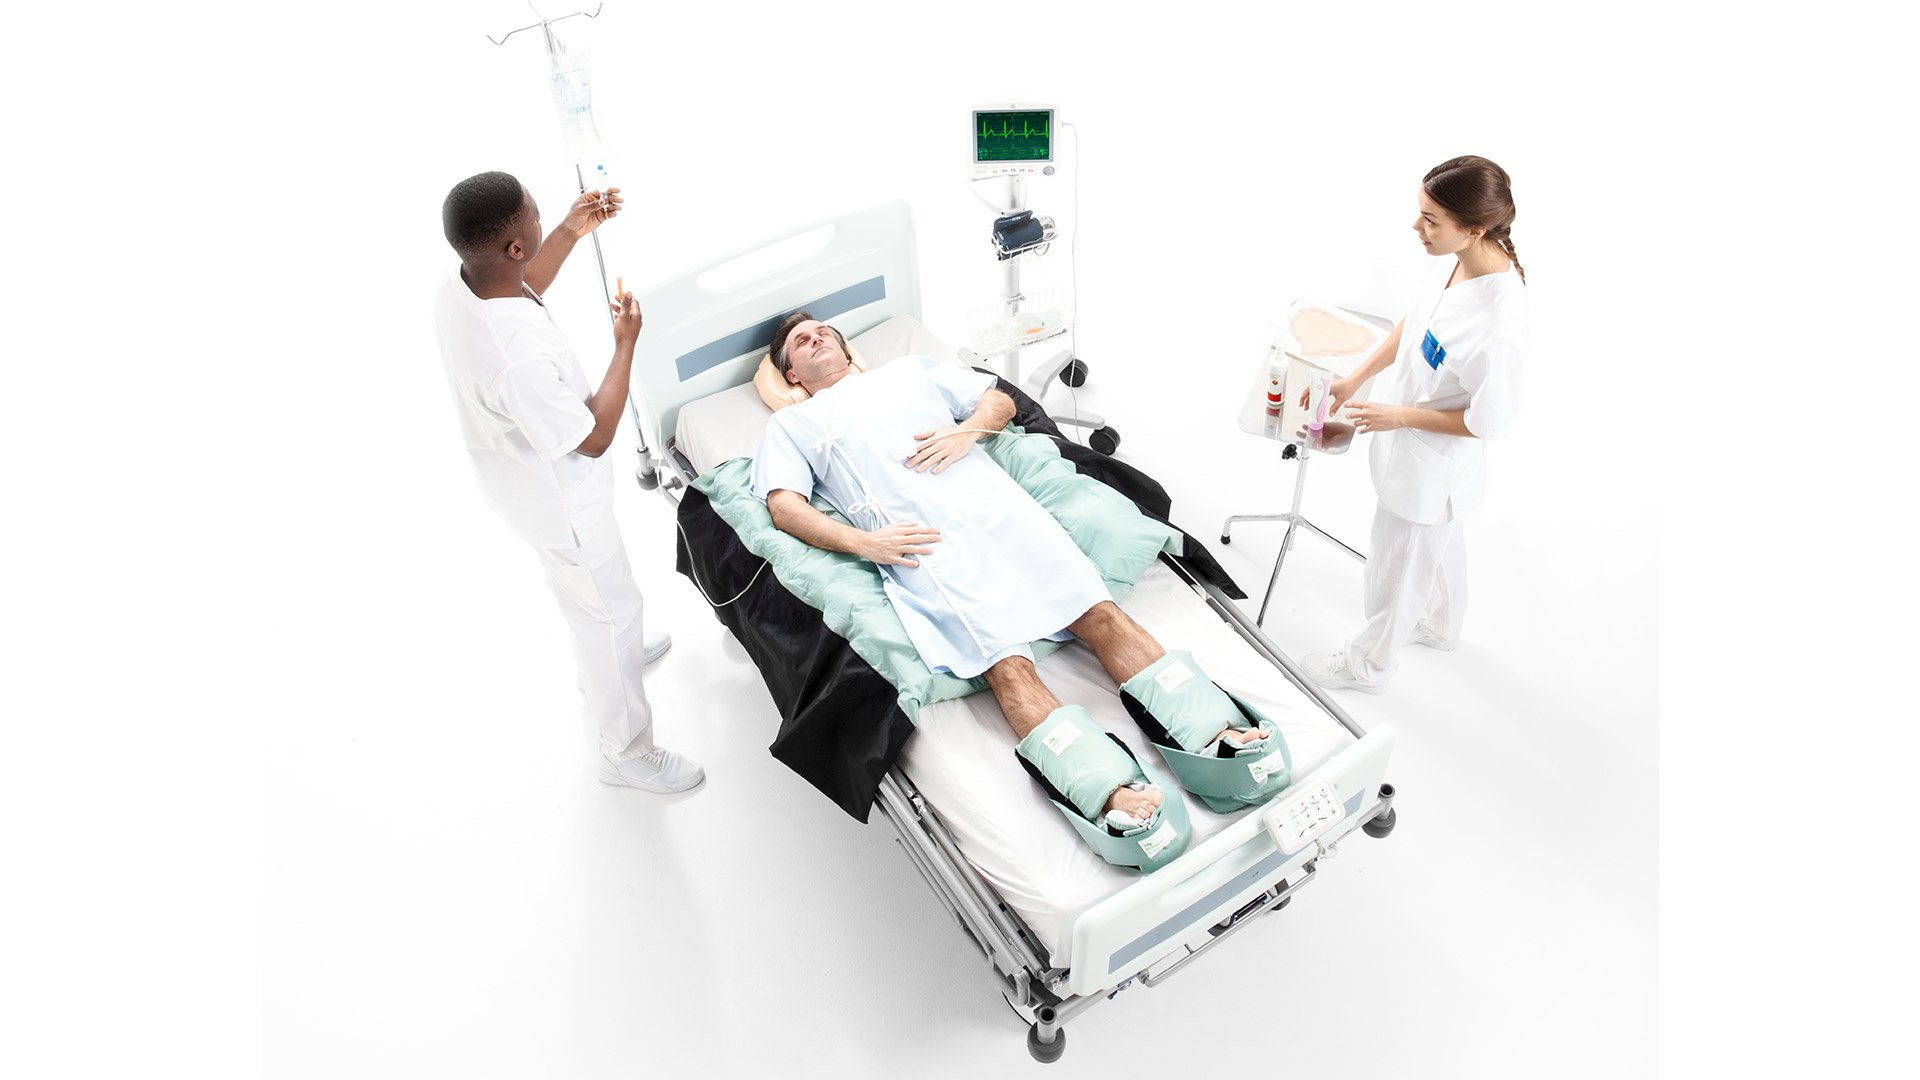 http://www.molnlycke.us/contentassets/ee89625f7c1b4da8b4bc7ebfebde9566/patient-with-turning-positioning-systems.jpg